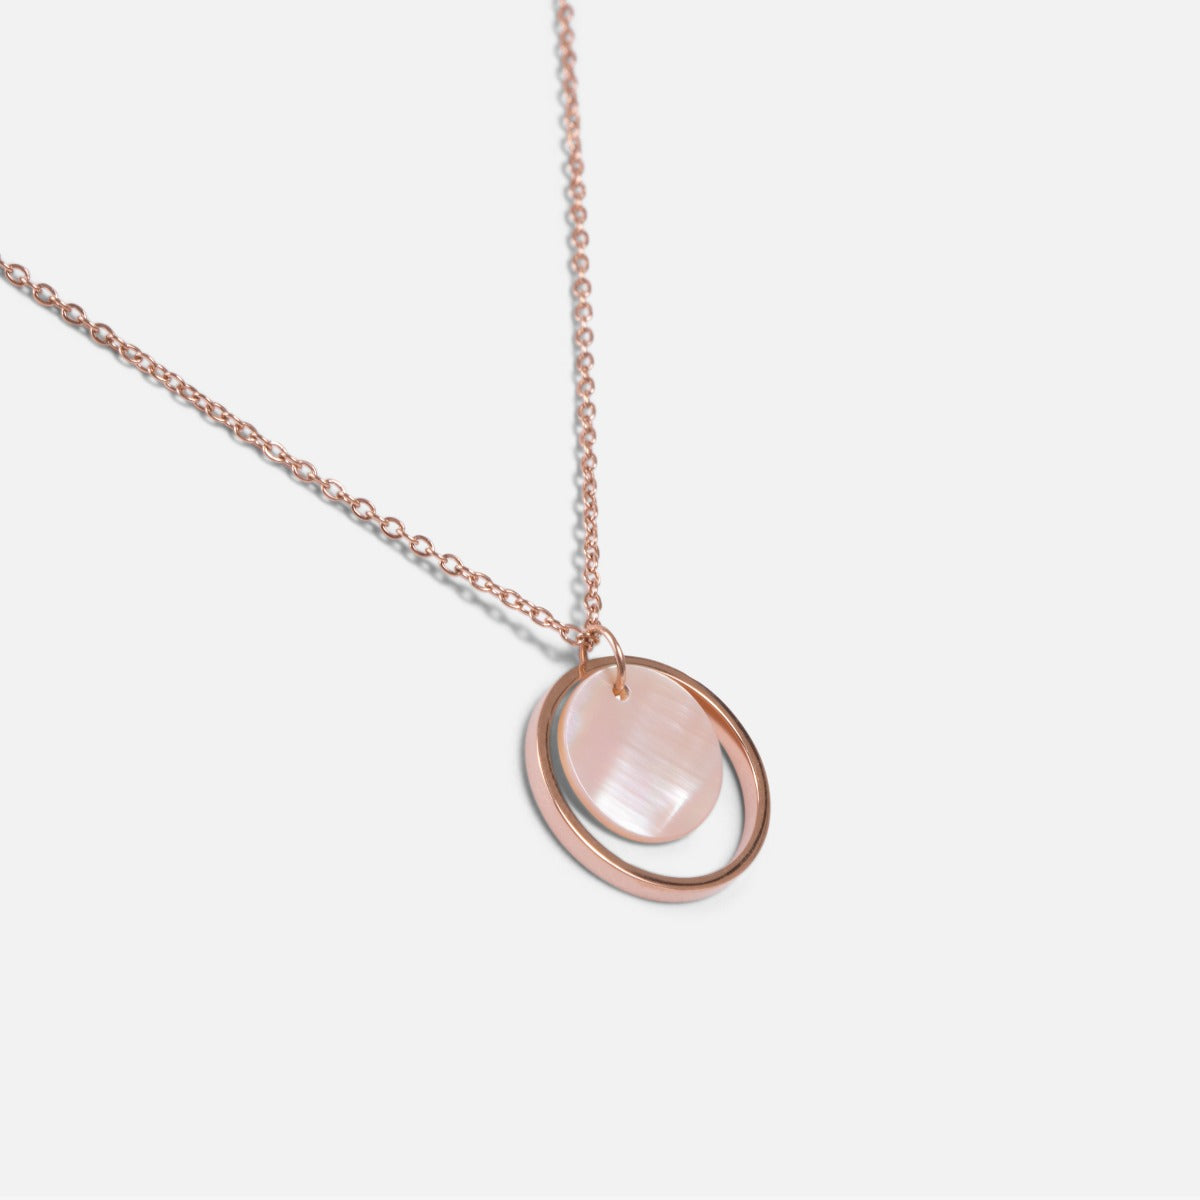 Stainless steel necklace with rose gold hoop and acetate ring